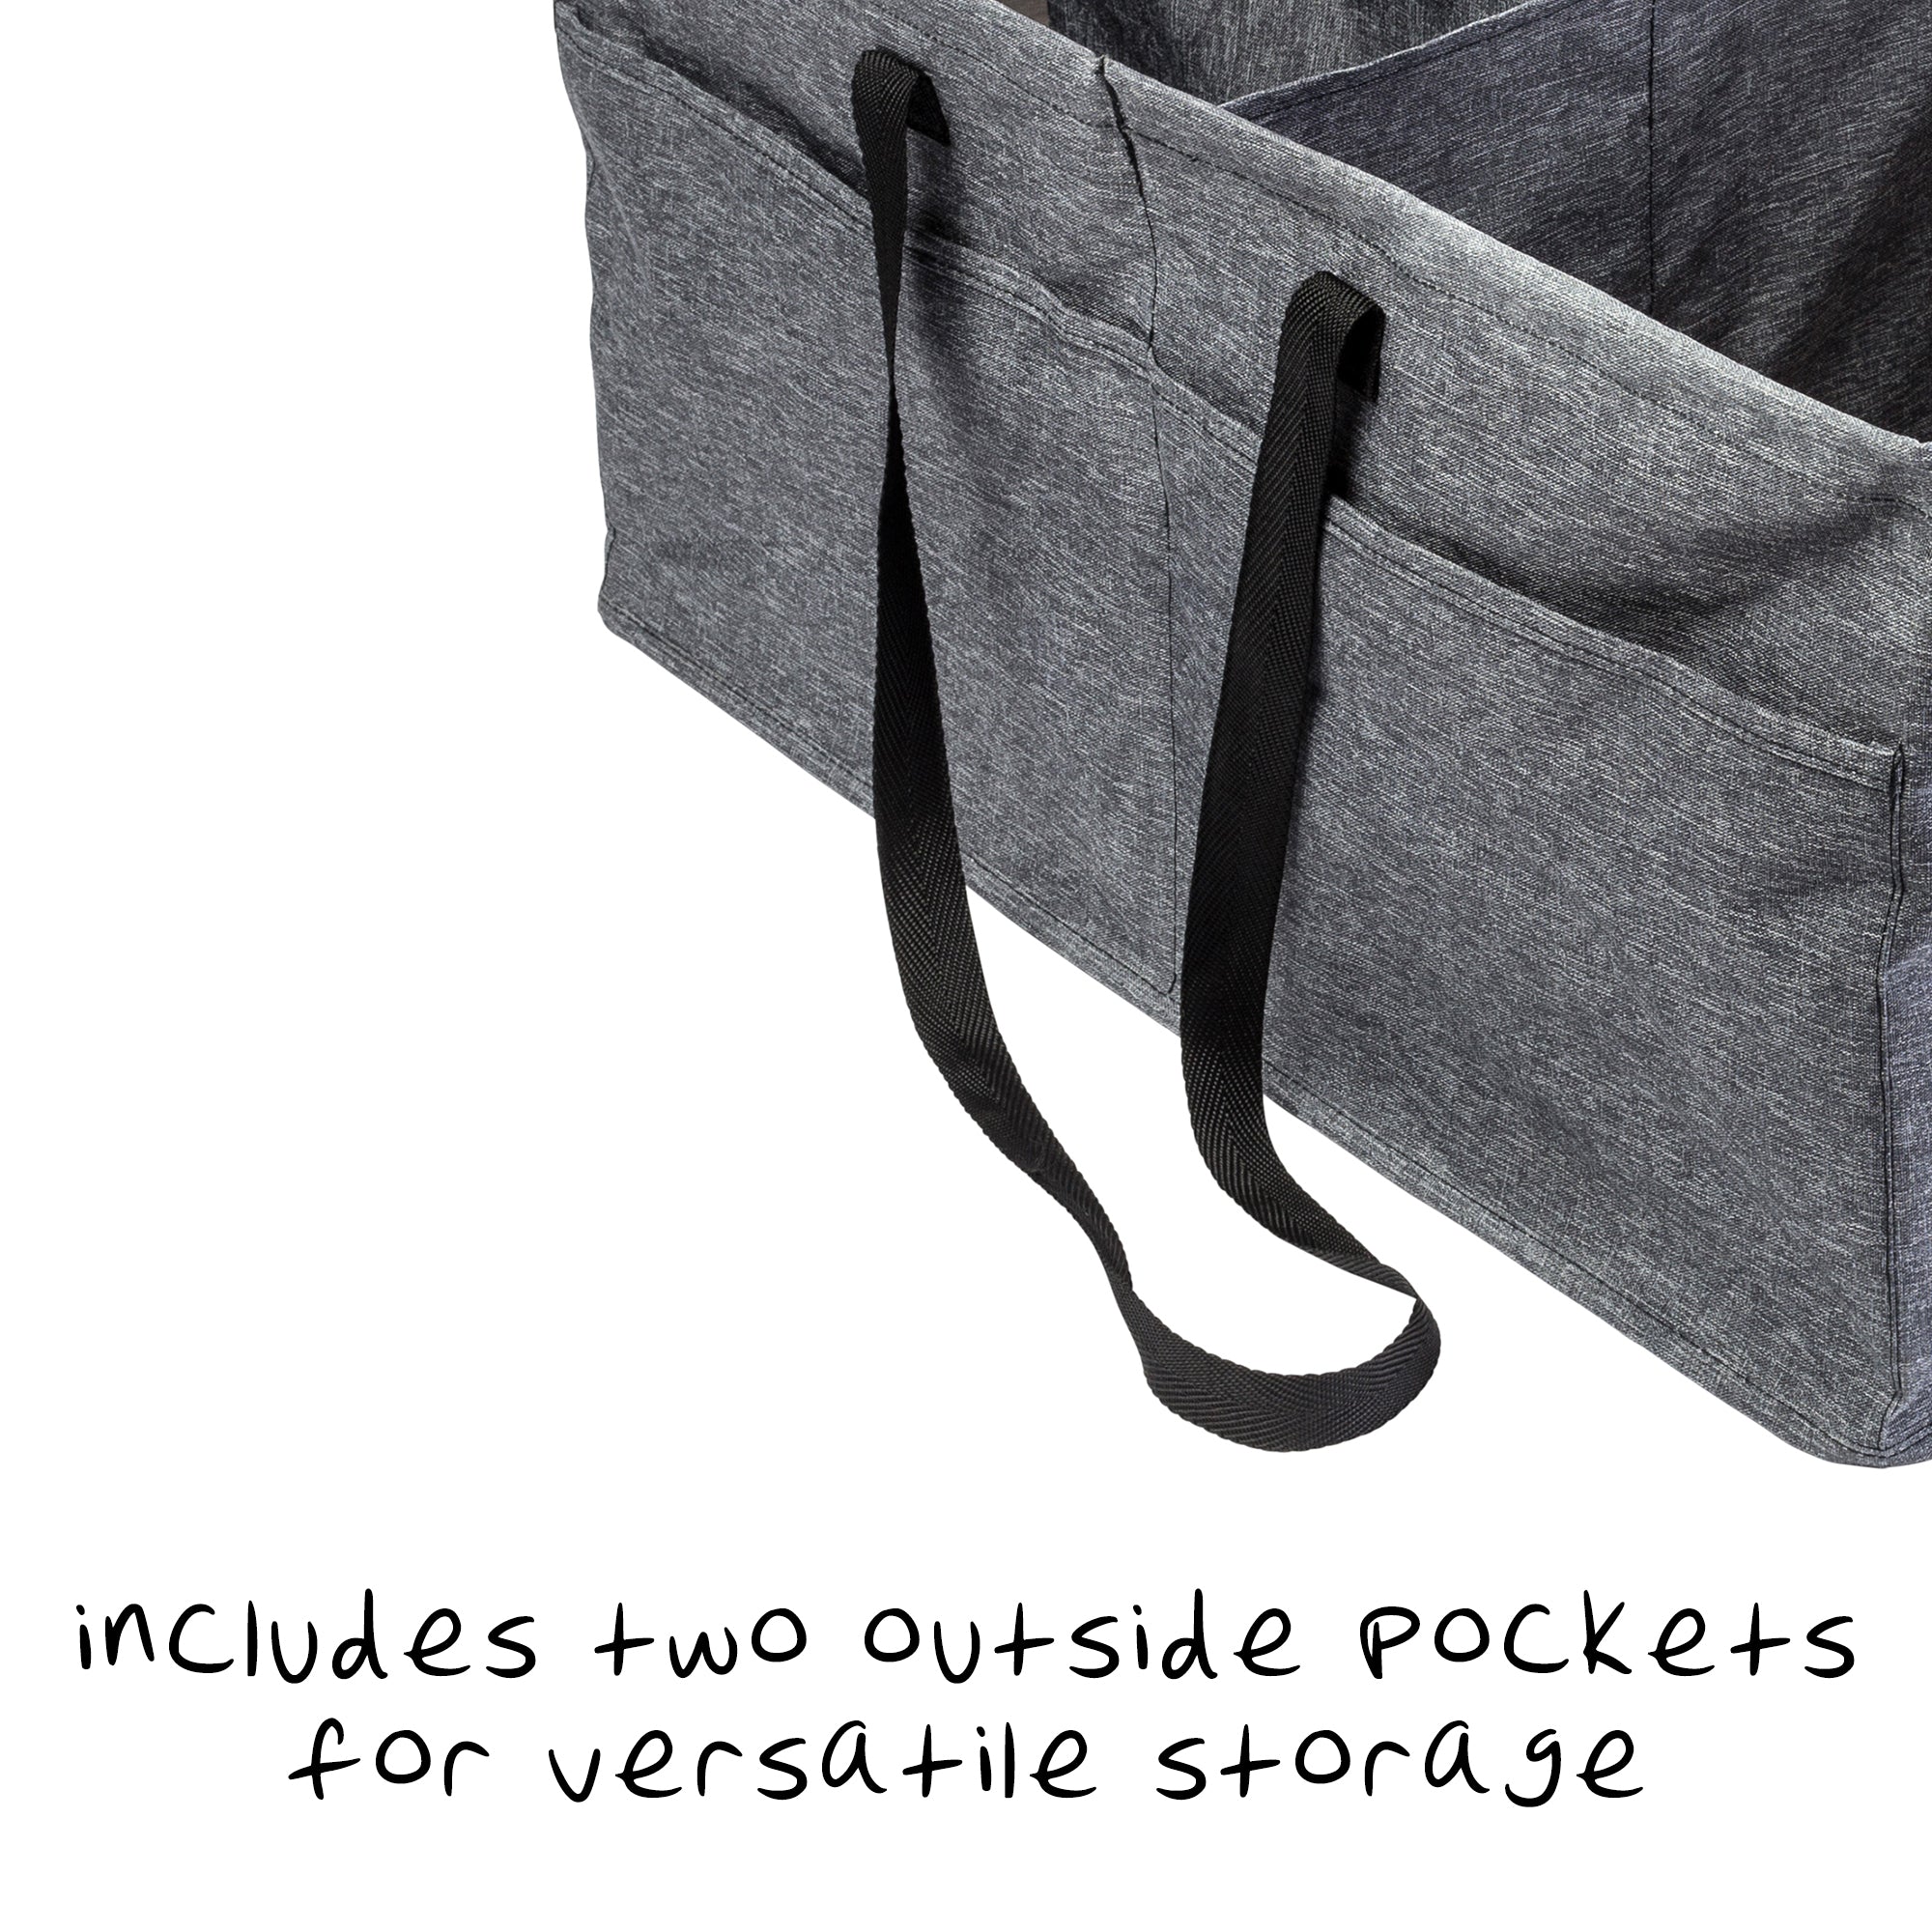 Charcoal Crosshatch - Large Utility Tote - Thirty-One Gifts